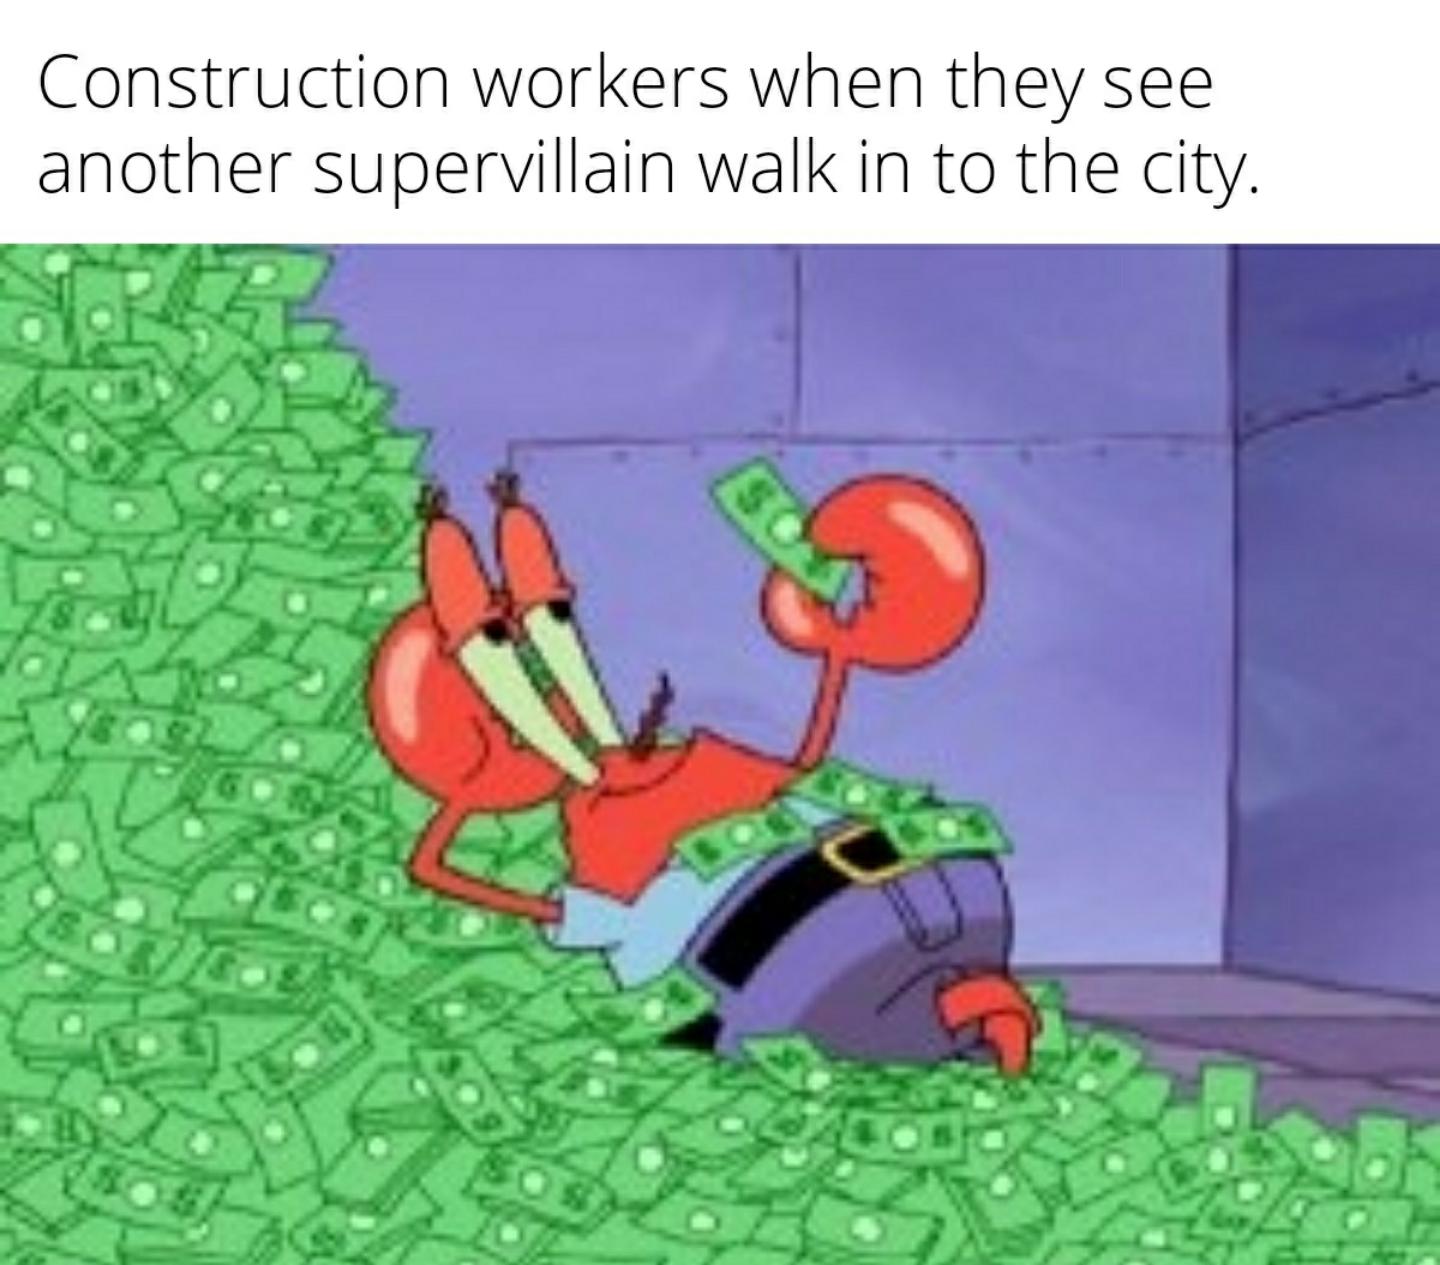 dank memes and funny pics - money meme template - Construction workers when they see another supervillain walk in to the city.